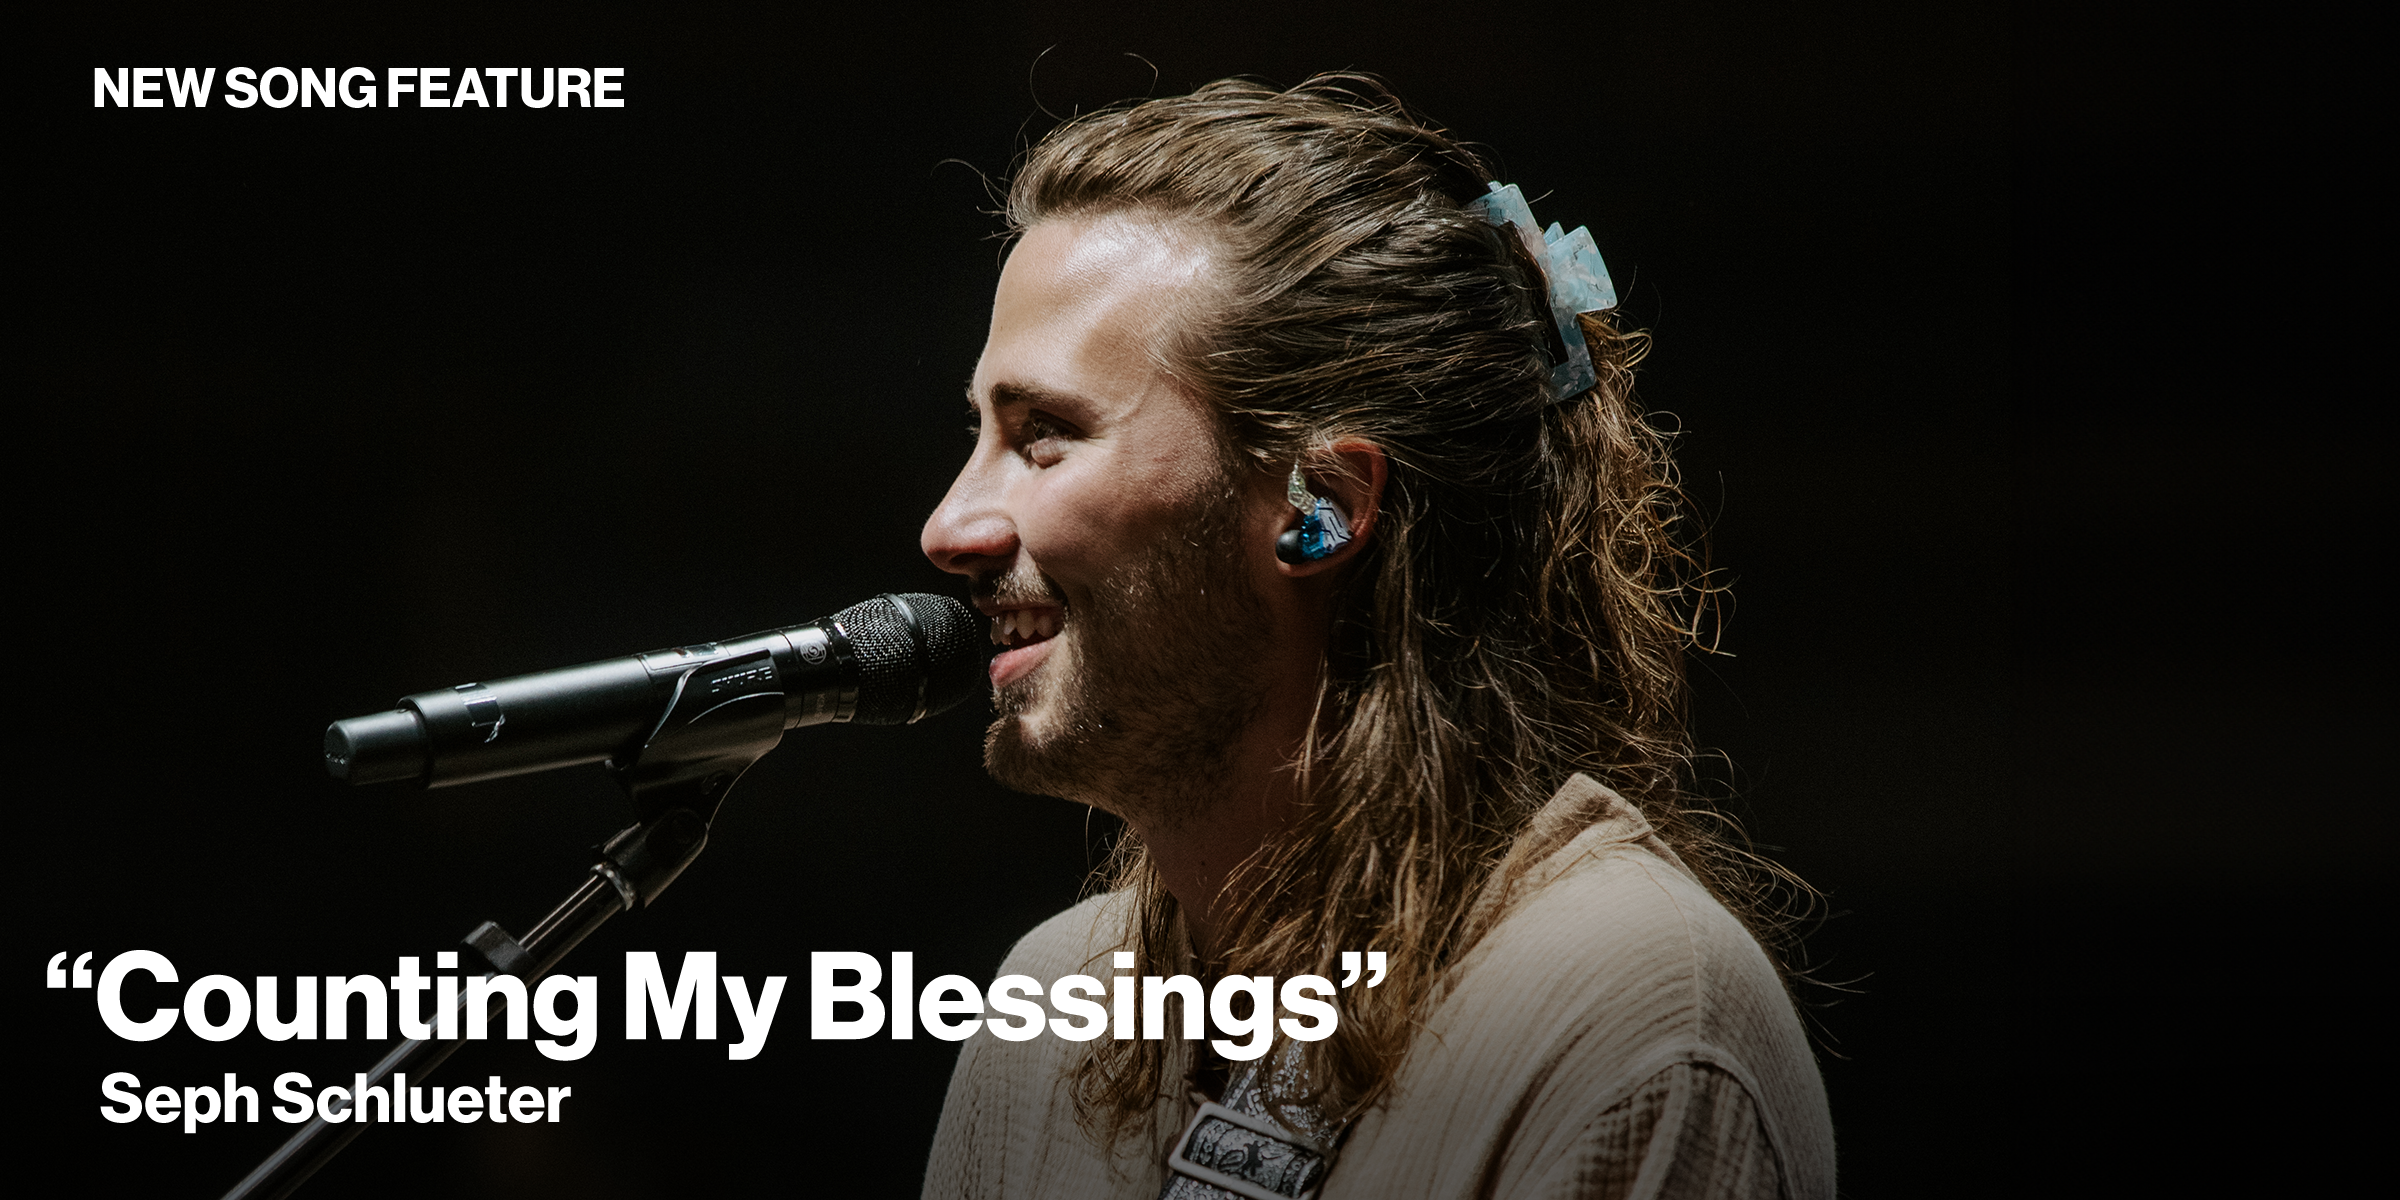 New Song Feature: "Counting My Blessings" Seph Schlueter